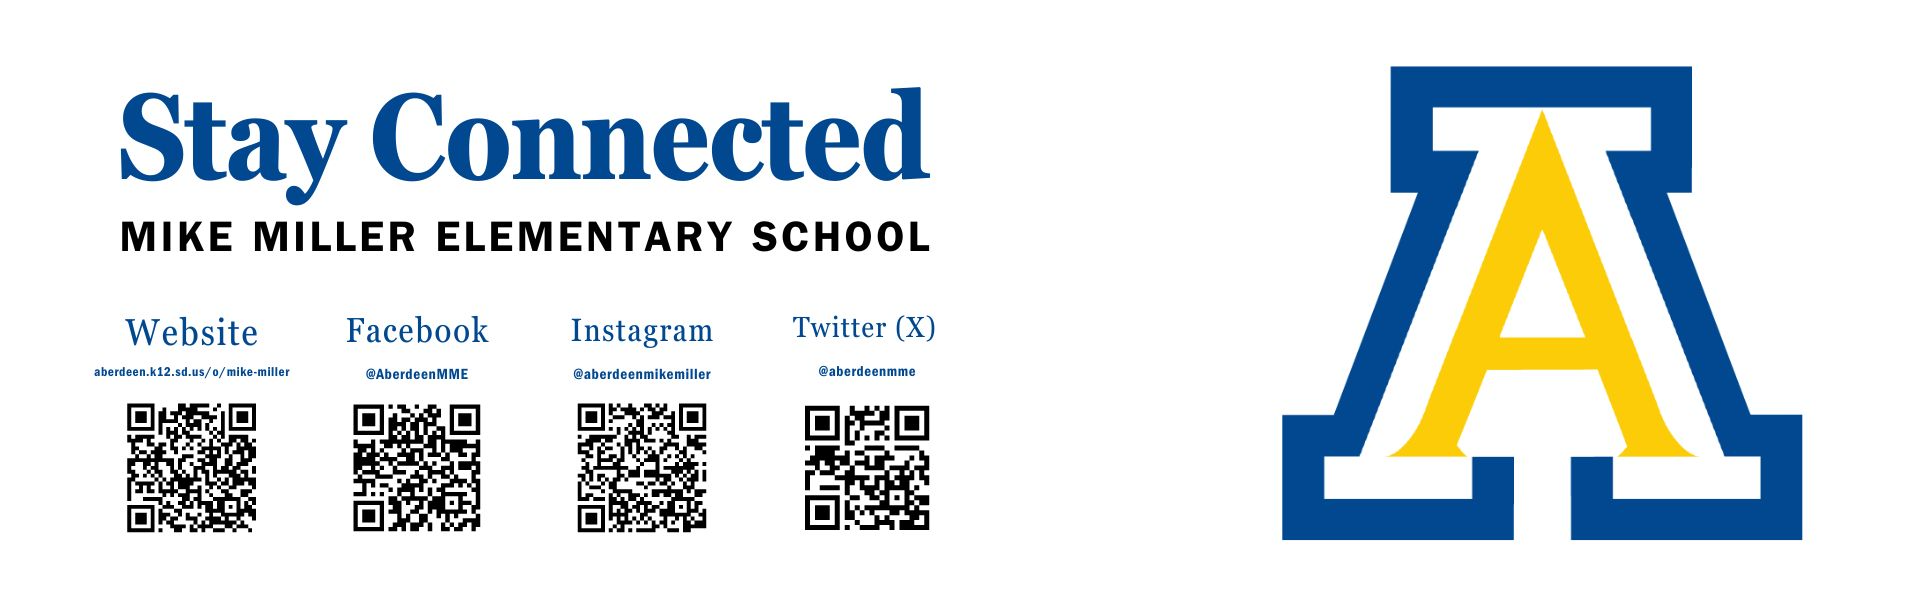 Stay Connected graphic with QR codes linking to Mike Miller Elementary social media